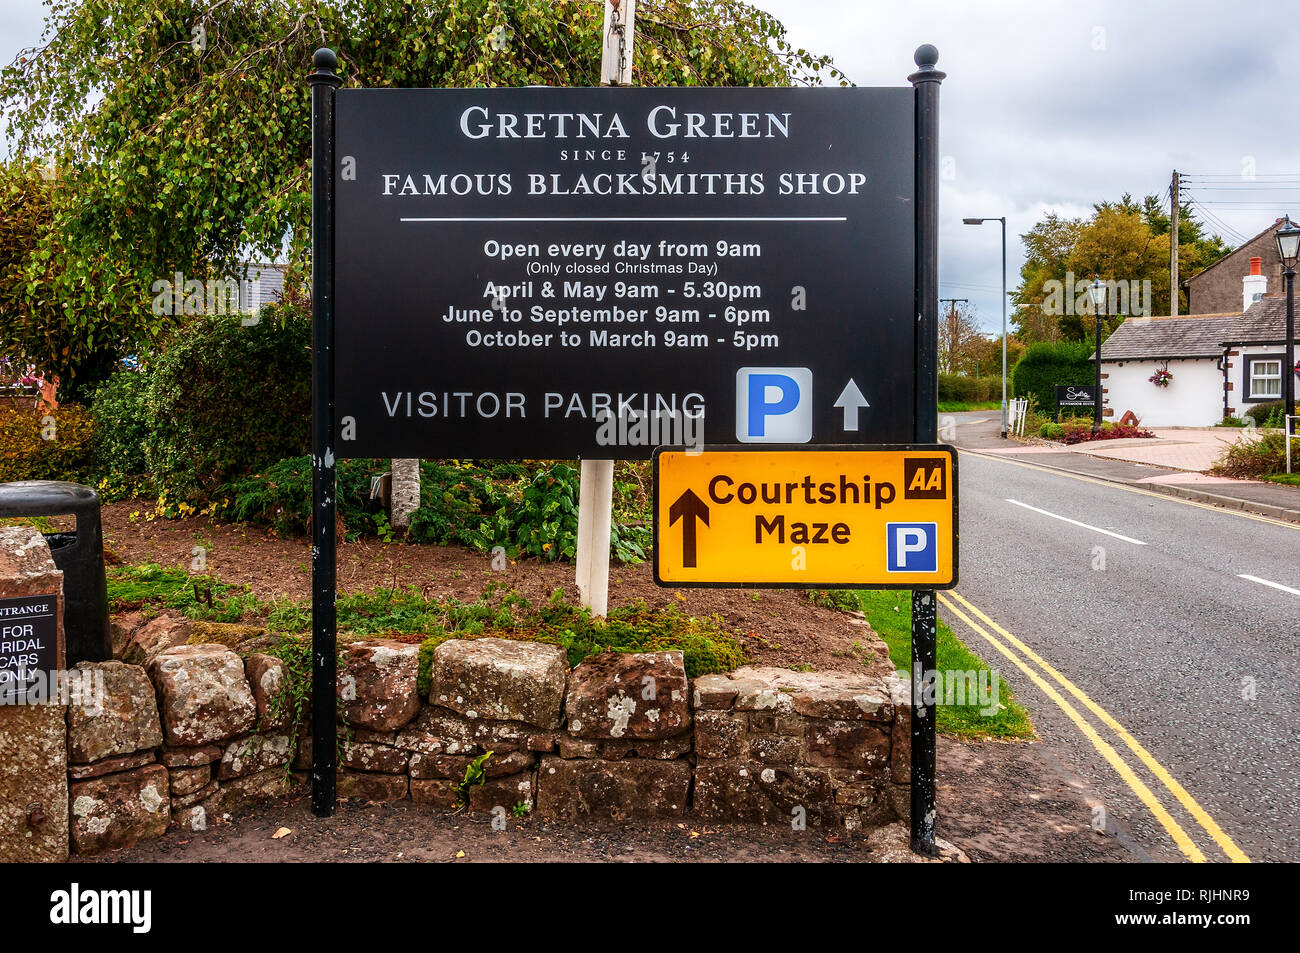 A large black notice board at the entrance to Gretna Green famous blacksmiths shop, with white lettering advertising and giving times of  opening Stock Photo